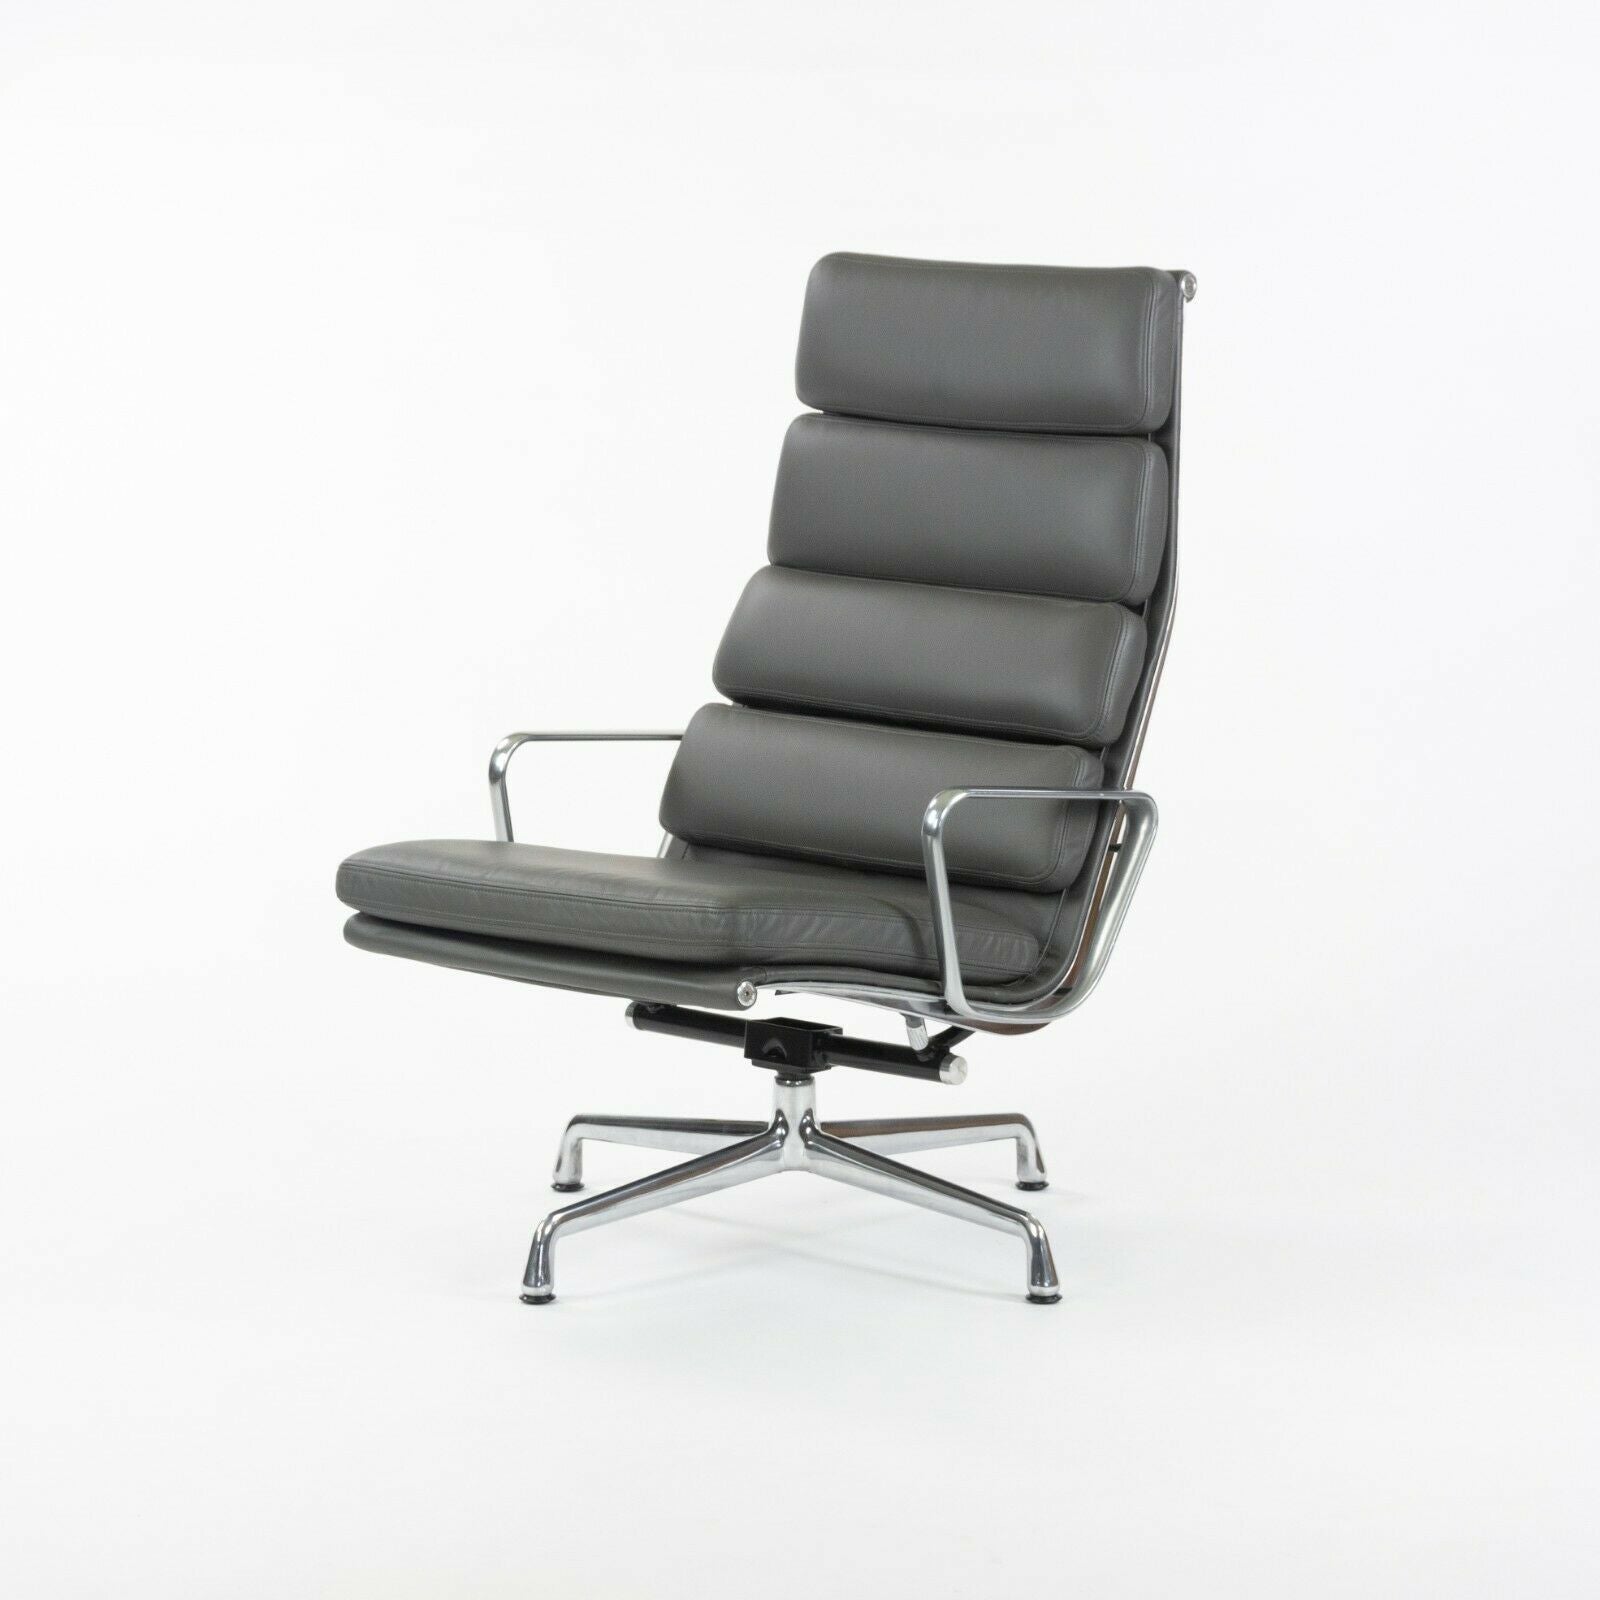 SOLD 2015 Eames Herman Miller Grey Soft Pad Aluminum Group Lounge Chair 3x Available